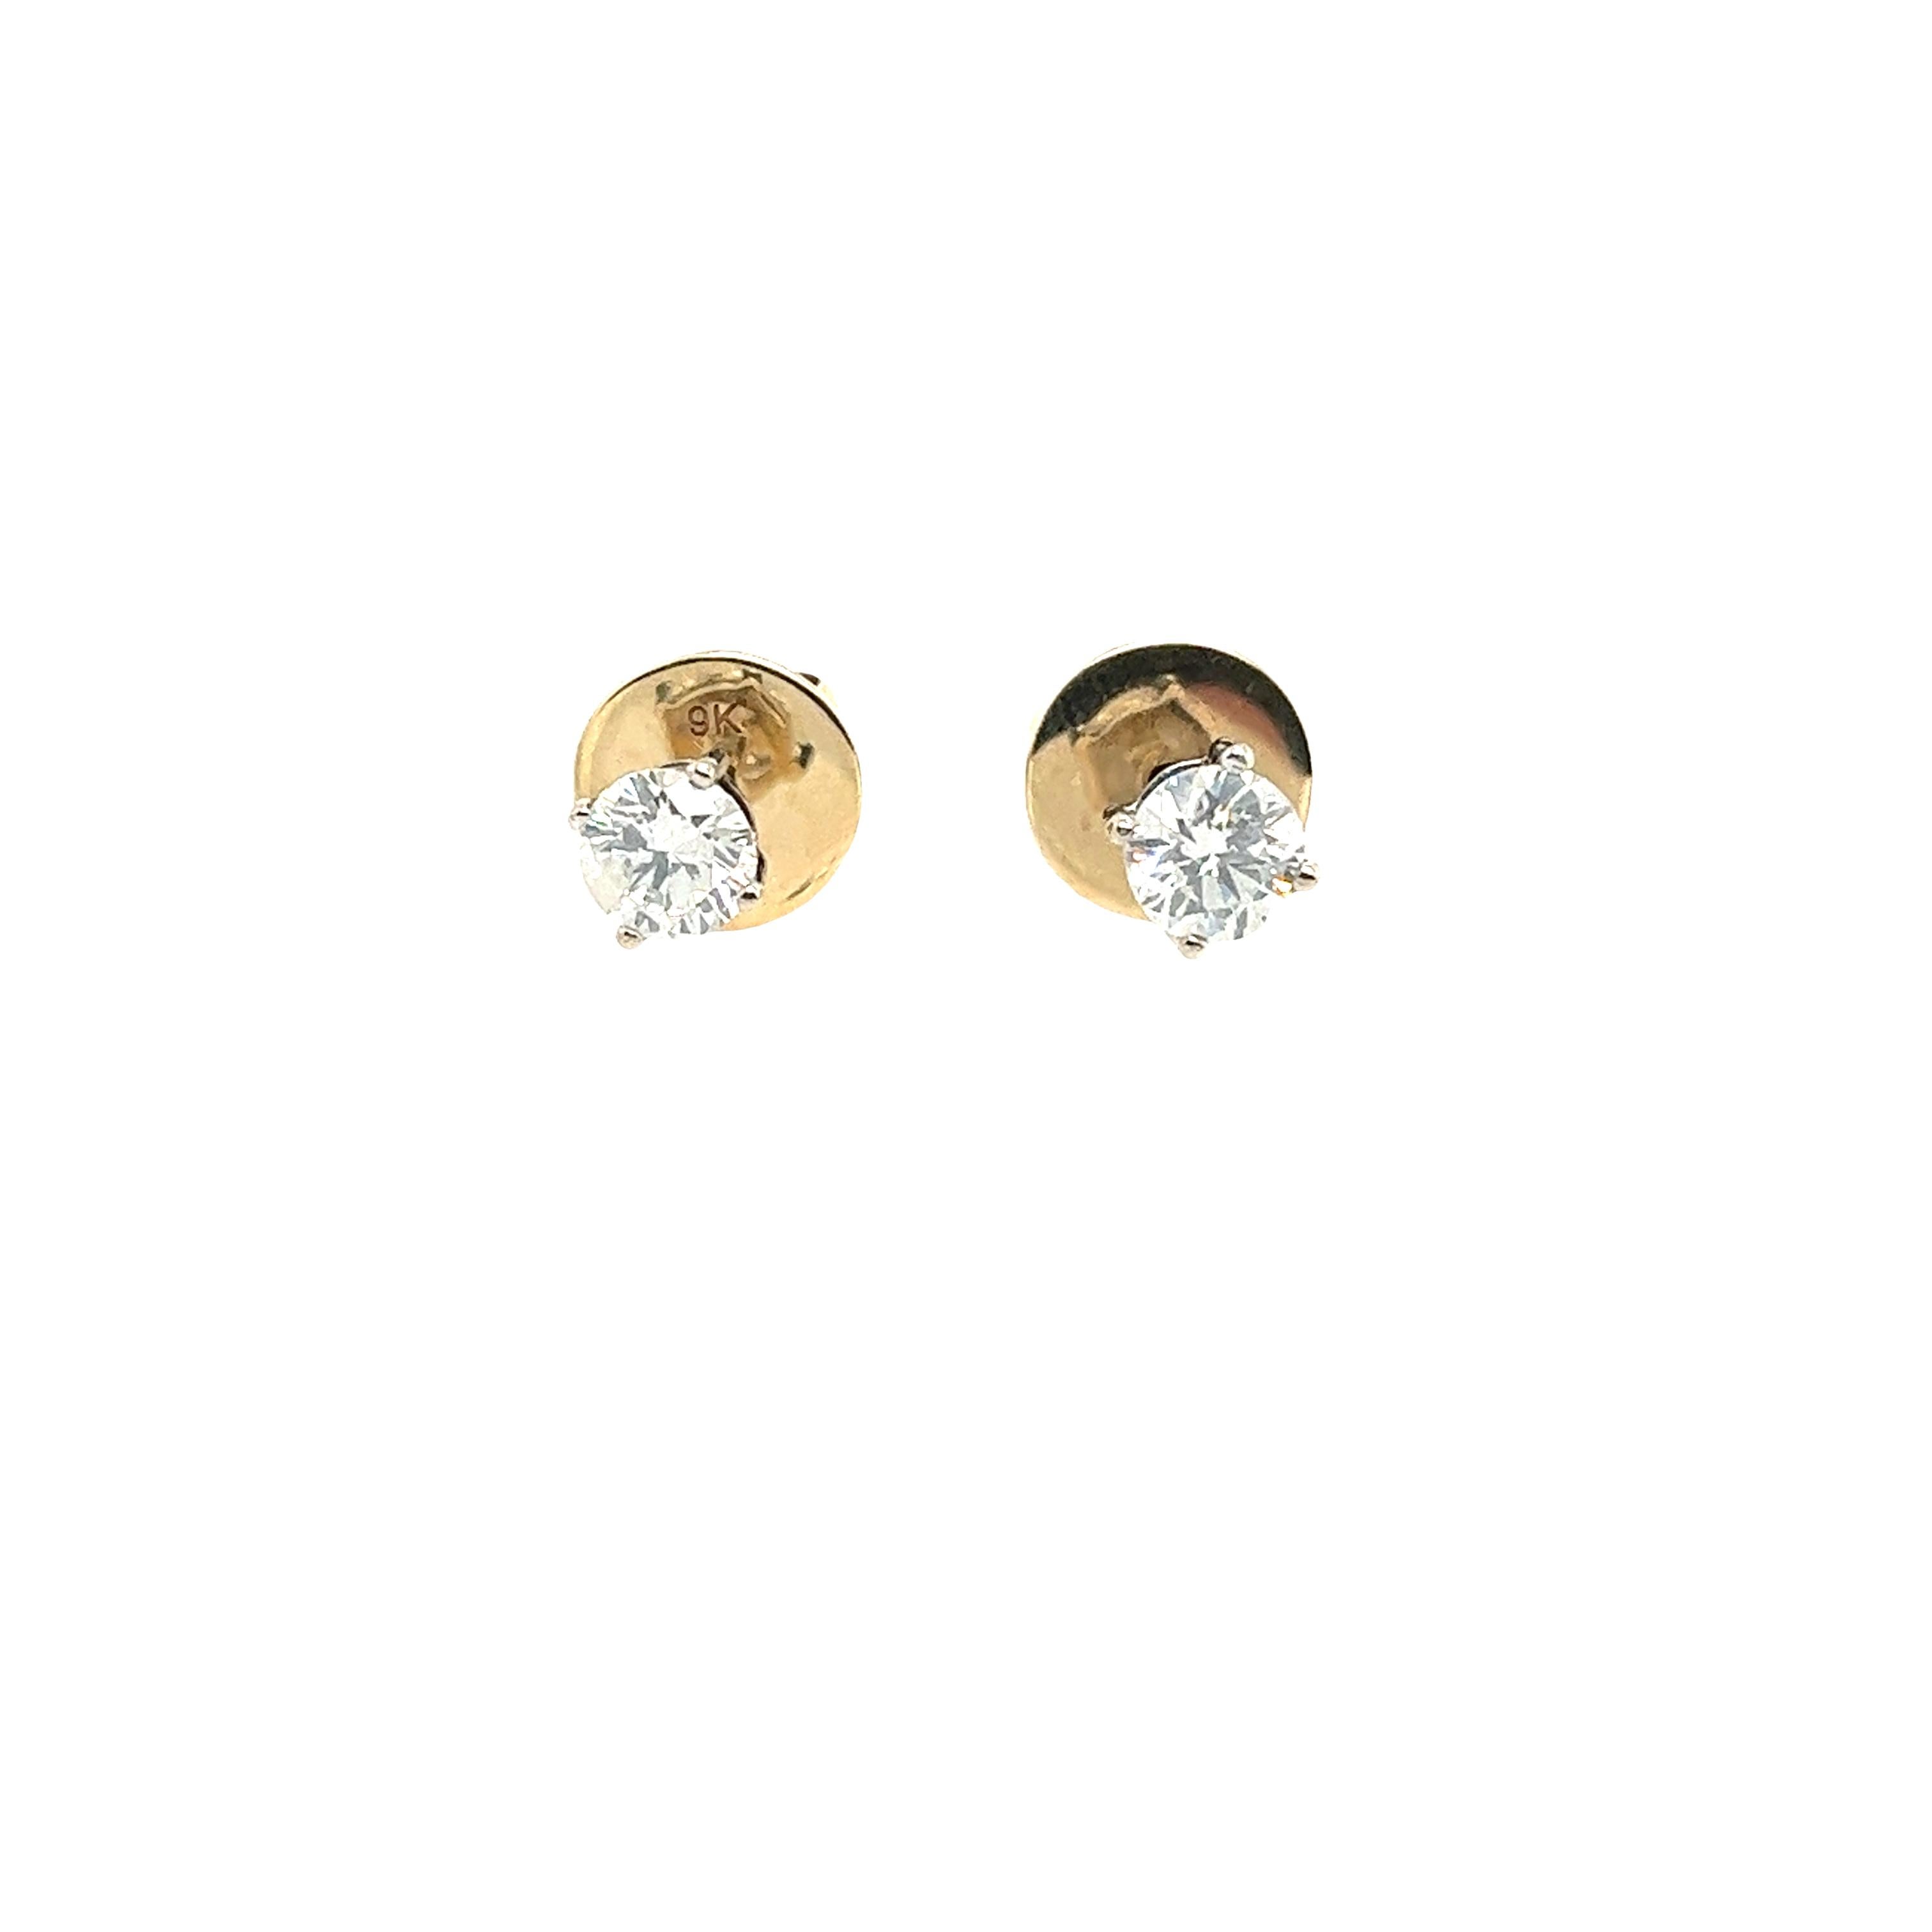 Brilliant Cut 9ct Yellow & White Gold Diamond Stud Earrings, 0.65ct Total Diamond Weight For Sale